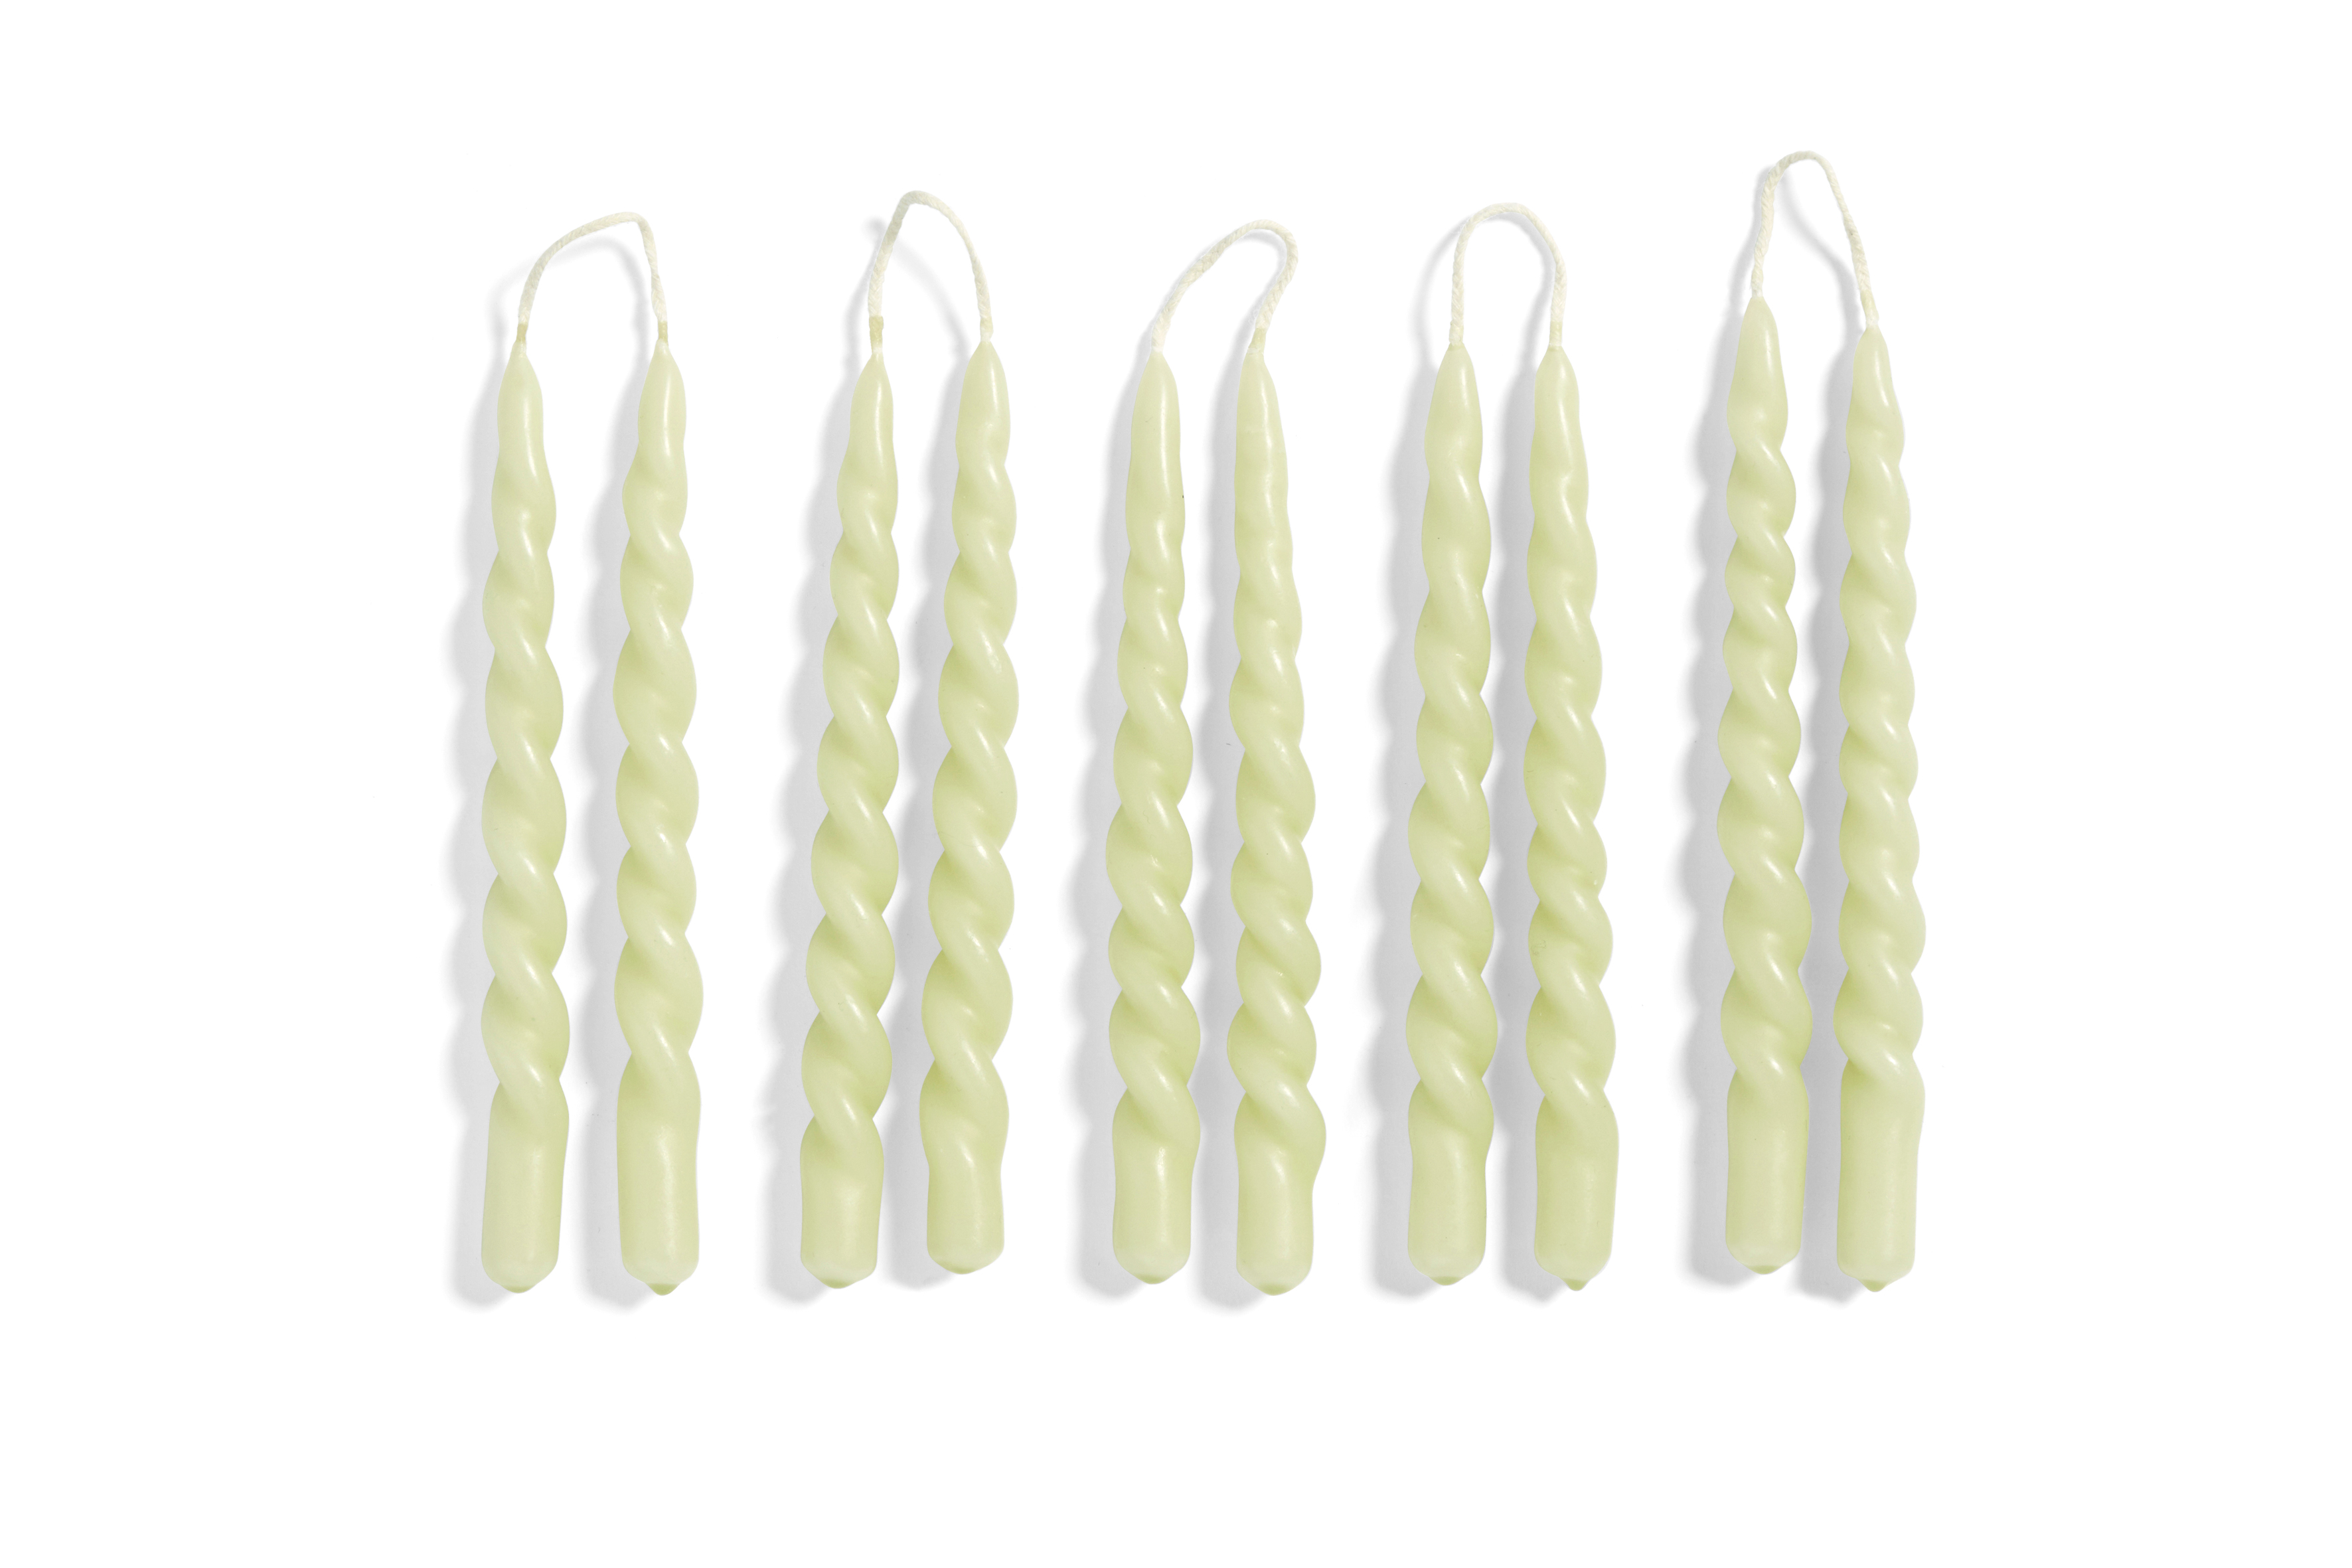 HAY Pair of mini swirl candles / Christmas Tree candles, Light green